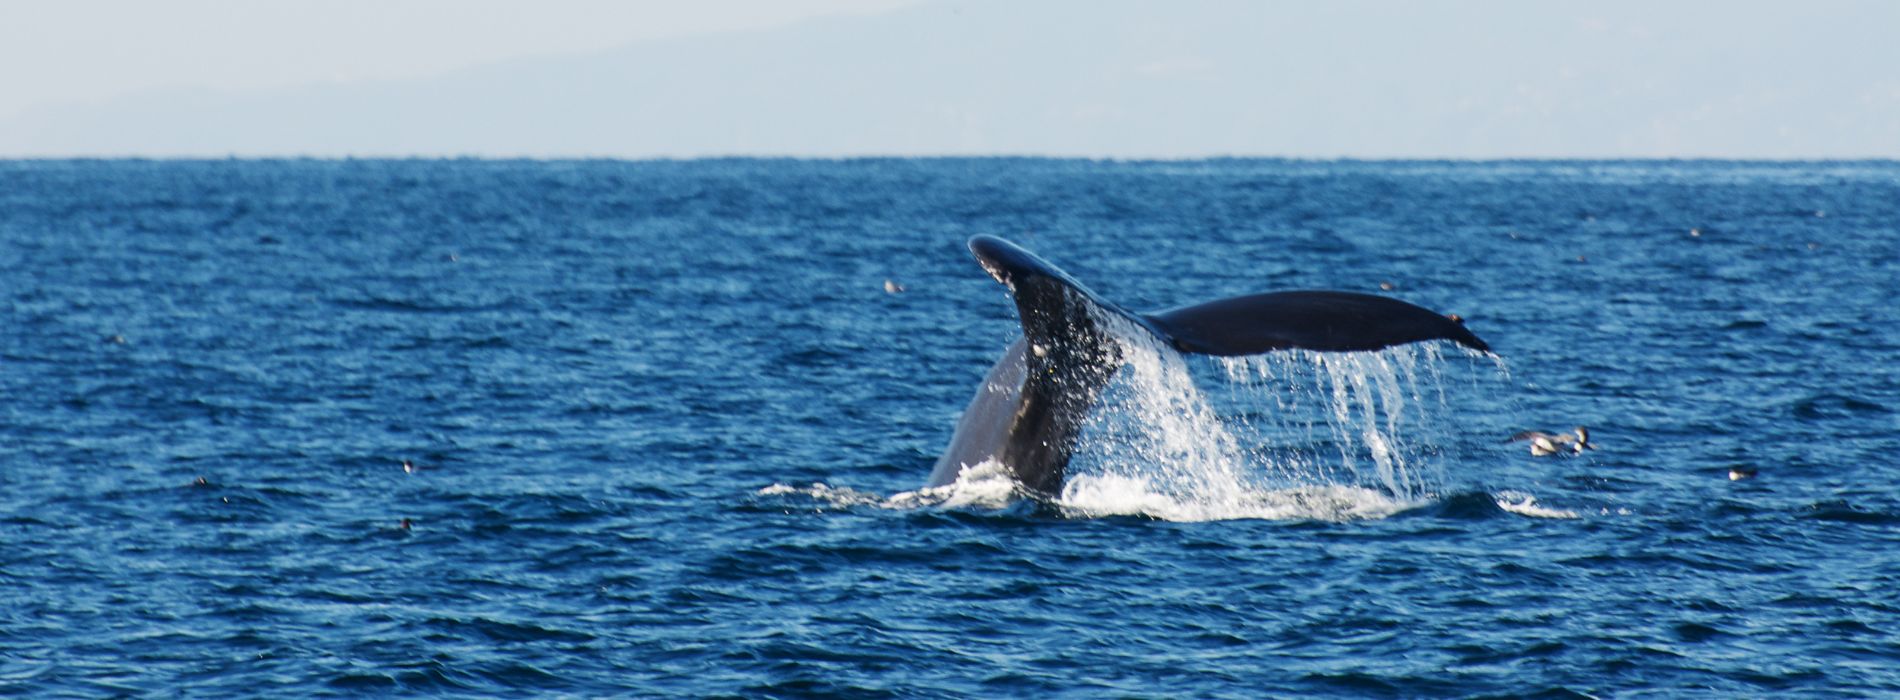 Best Whale Watching Tour in Kauai - A Mesmerizing Encounter with the Gentle Giants of the Sea - Madeinsea©